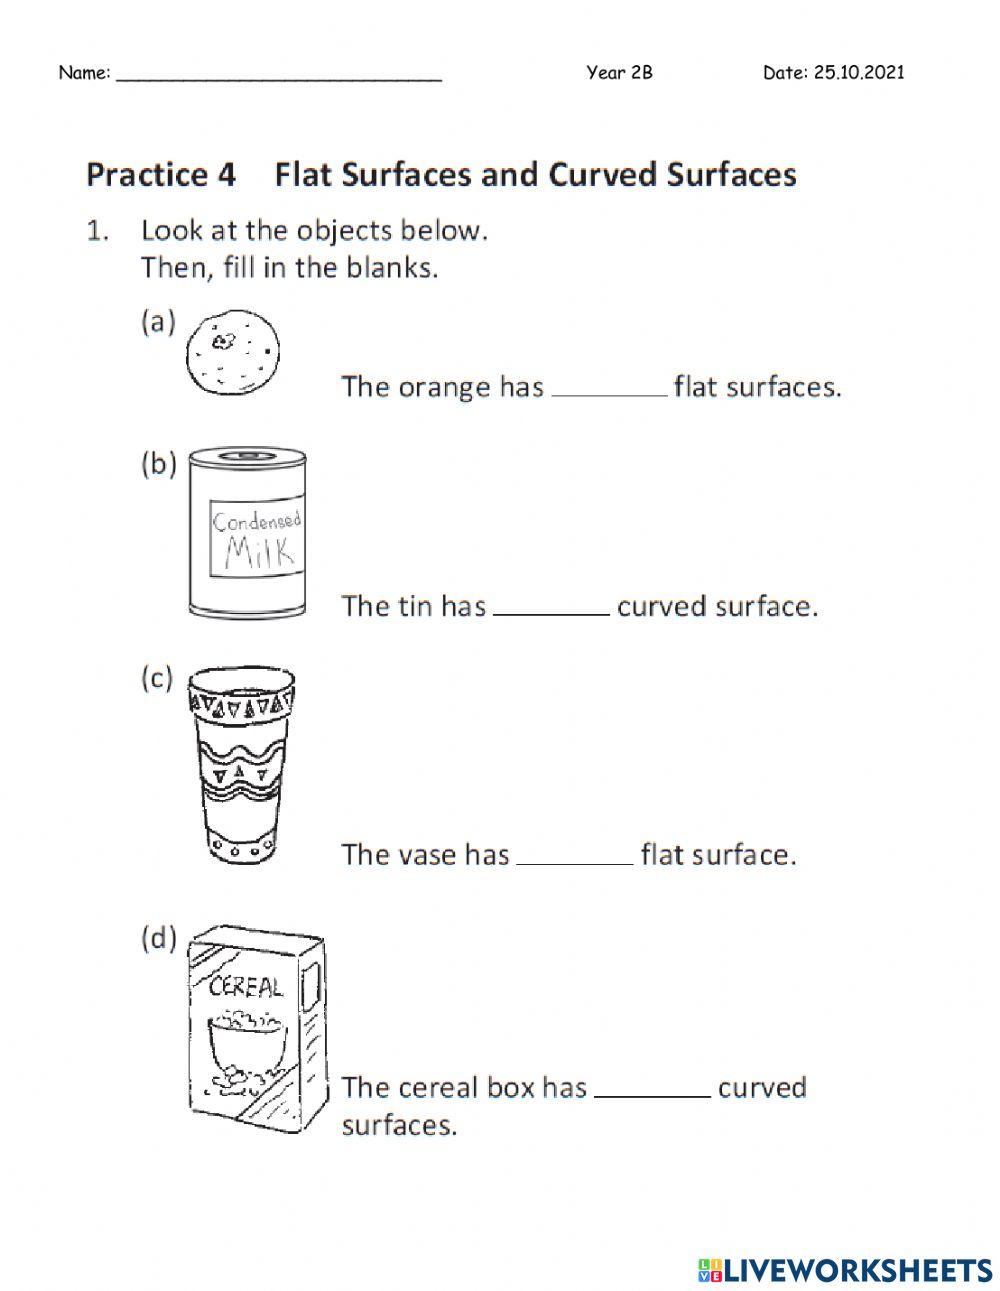 Flat and Curved Surfaces